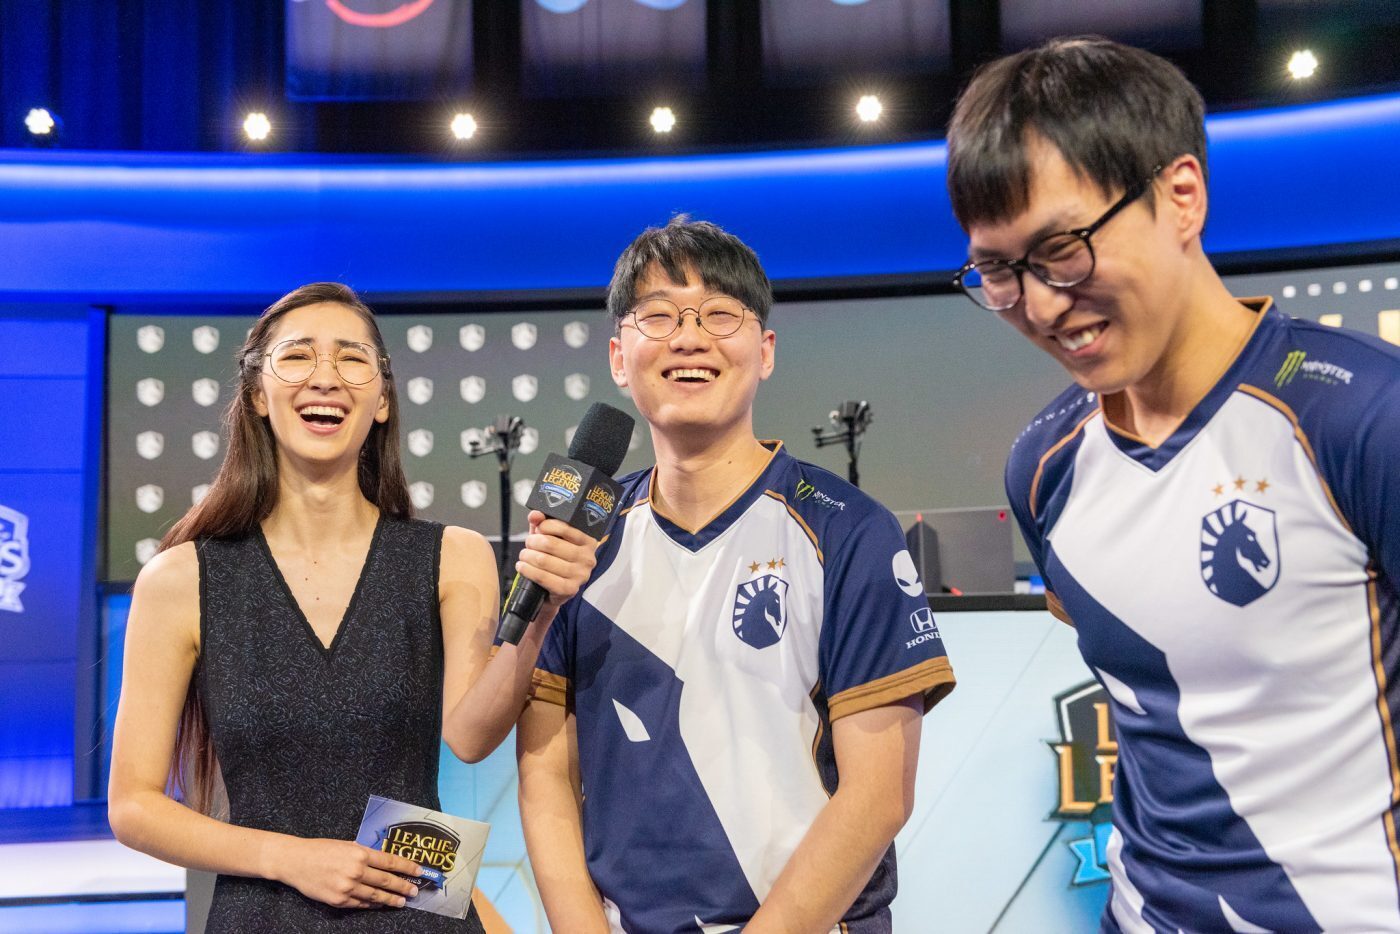 Team Liquid are the favorites to win the LCS Summer Playoff. (Photo by Paul de Leon/Riot Games)